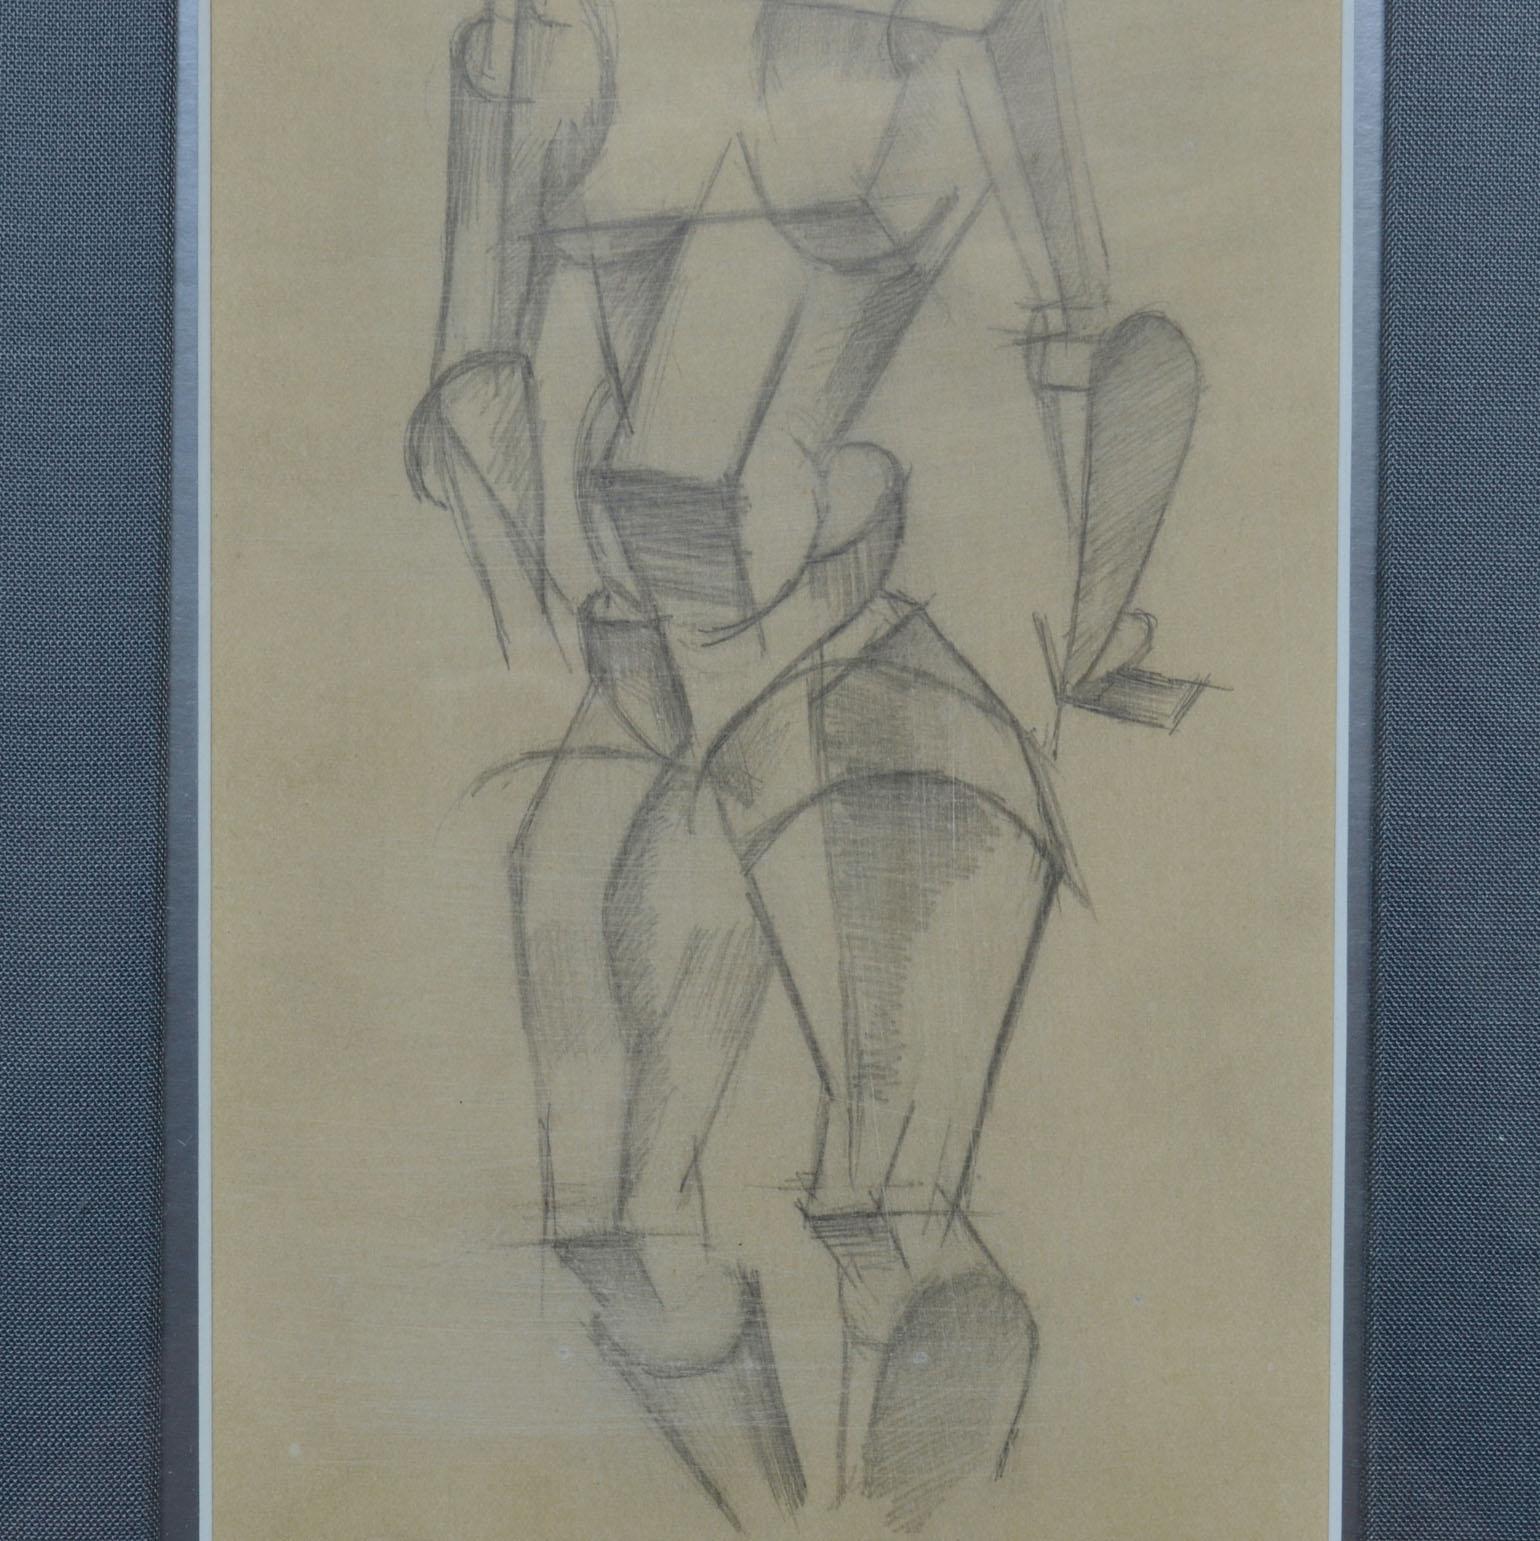 Female nude drawings in Cubist style are early 20th century drawn in pencil and framed with grey linen passe par-tout. In these drawings foreshortening, modelling, movement and chiaroscuro, (use of contrasts of light to achieve a sense of volume in